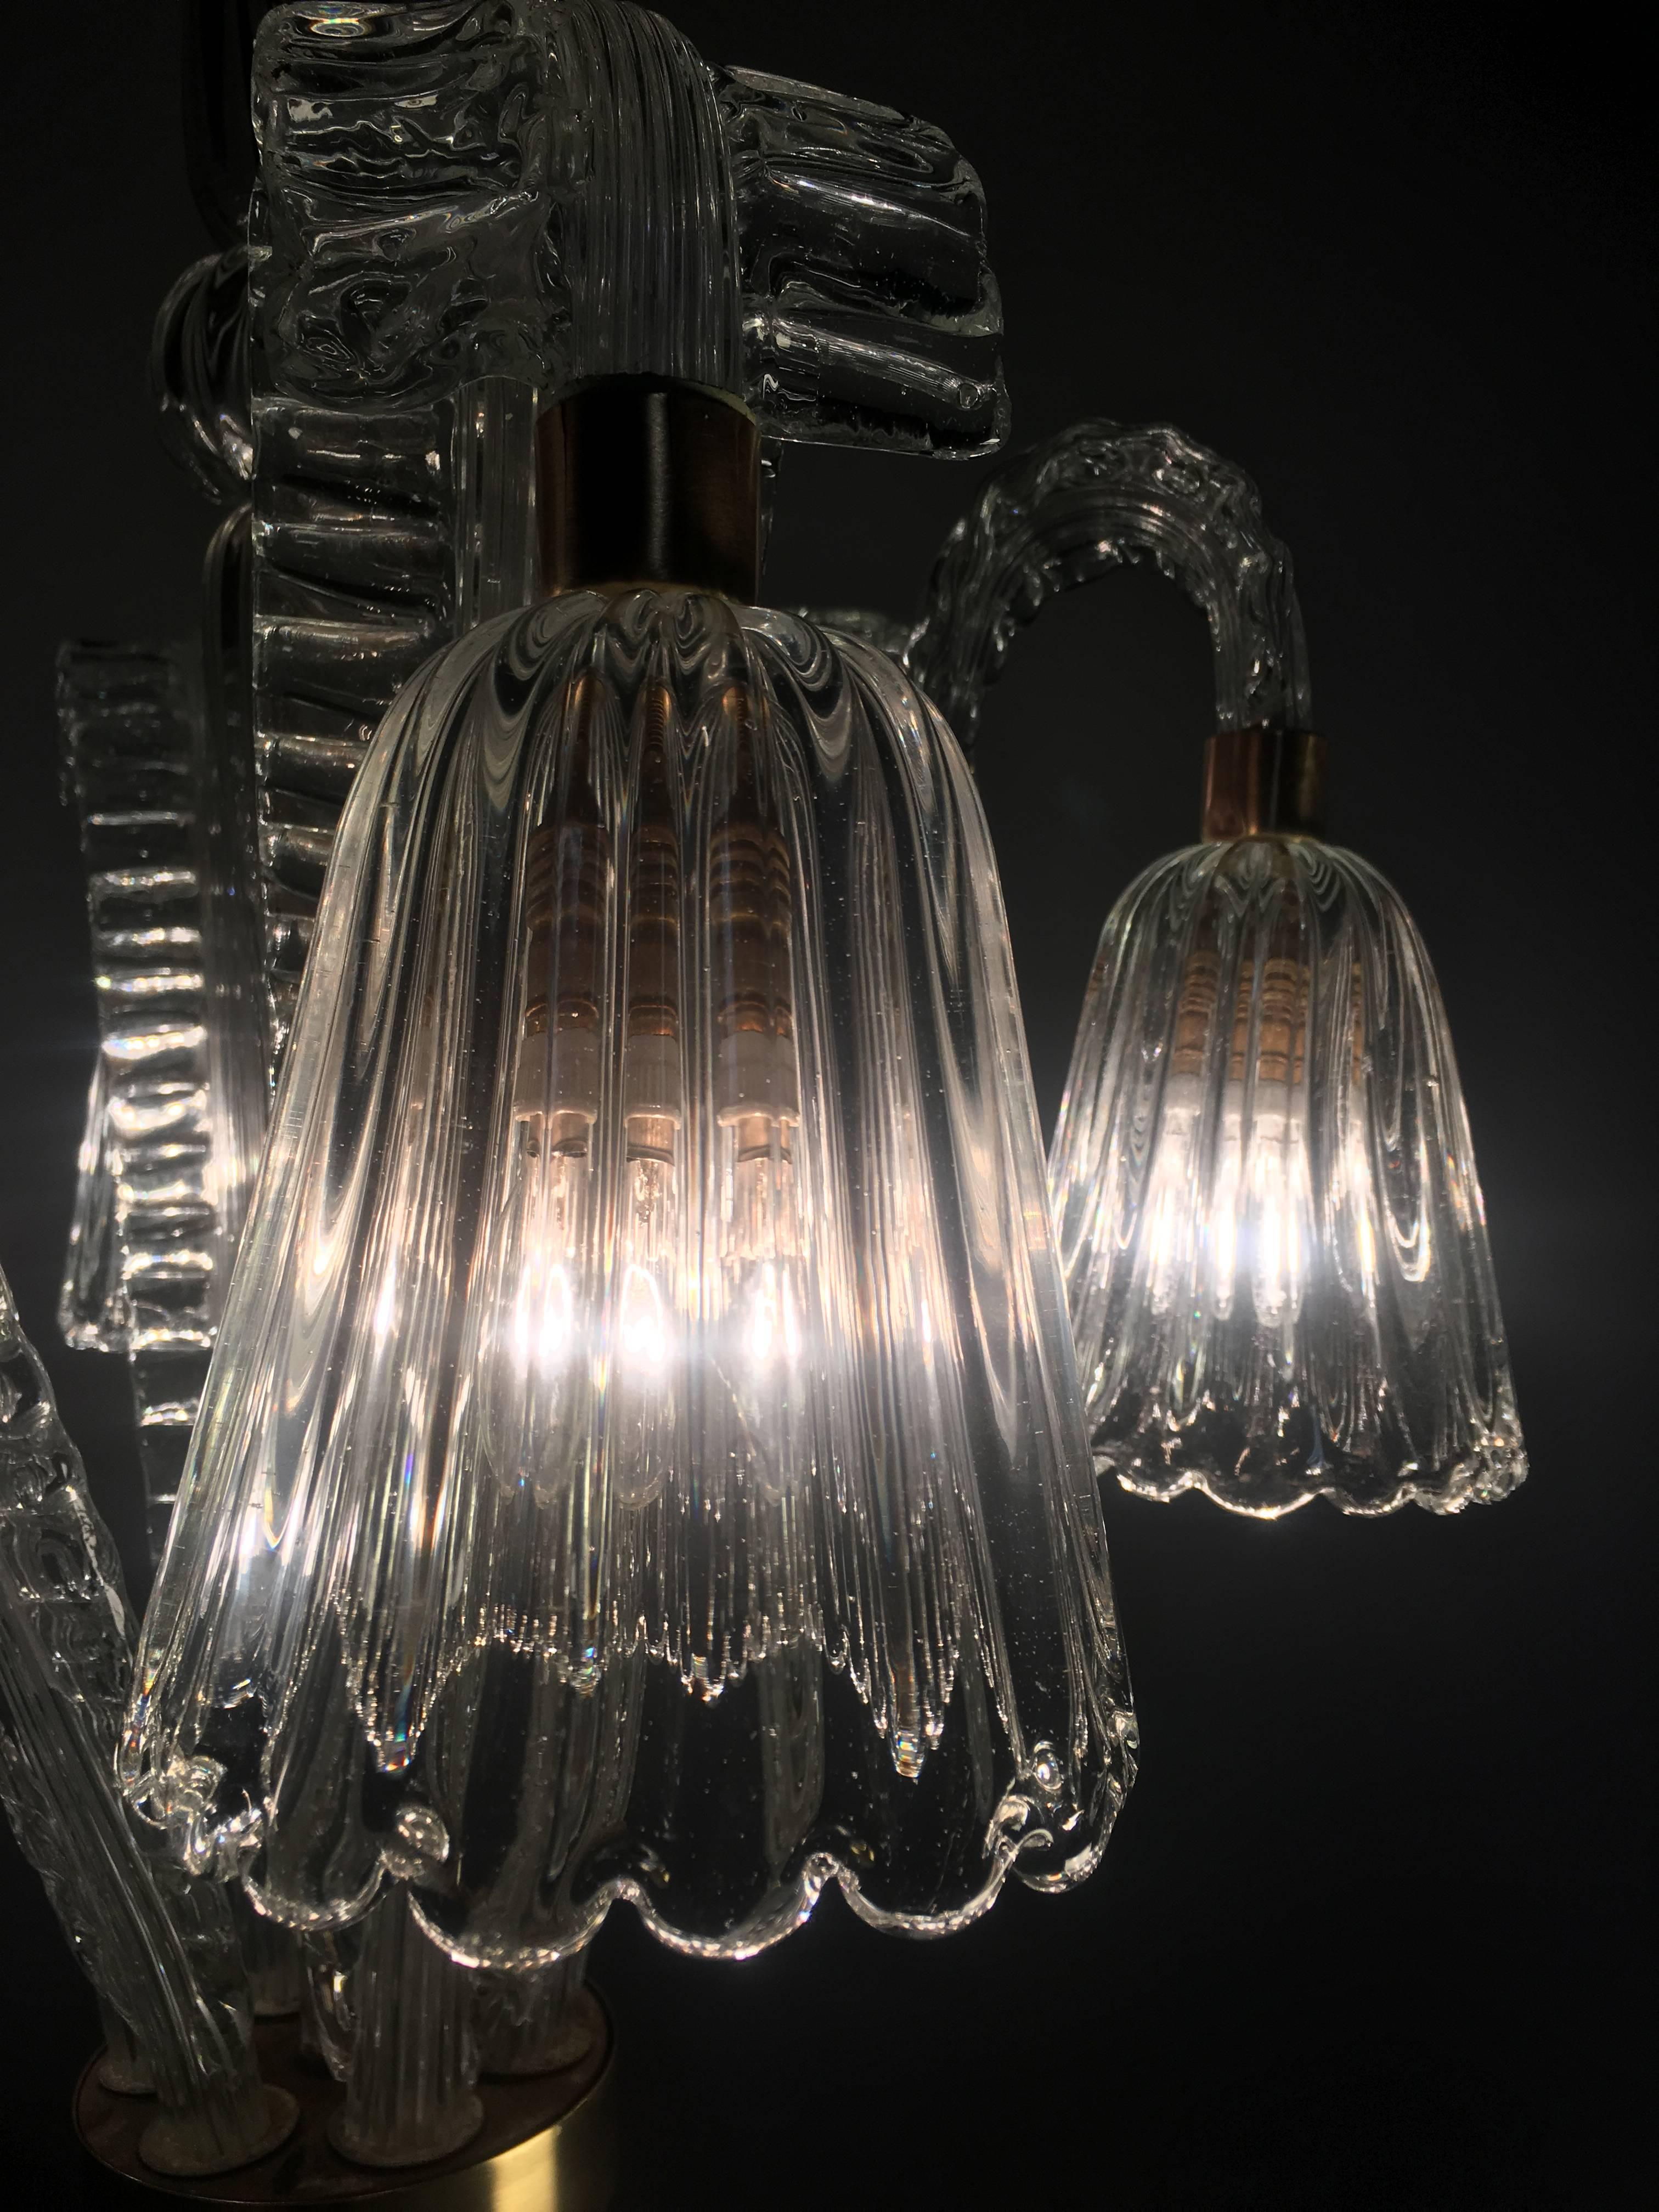 Charming Art Deco Chandelier by Ercole Barovier, Murano, 1940s For Sale 3